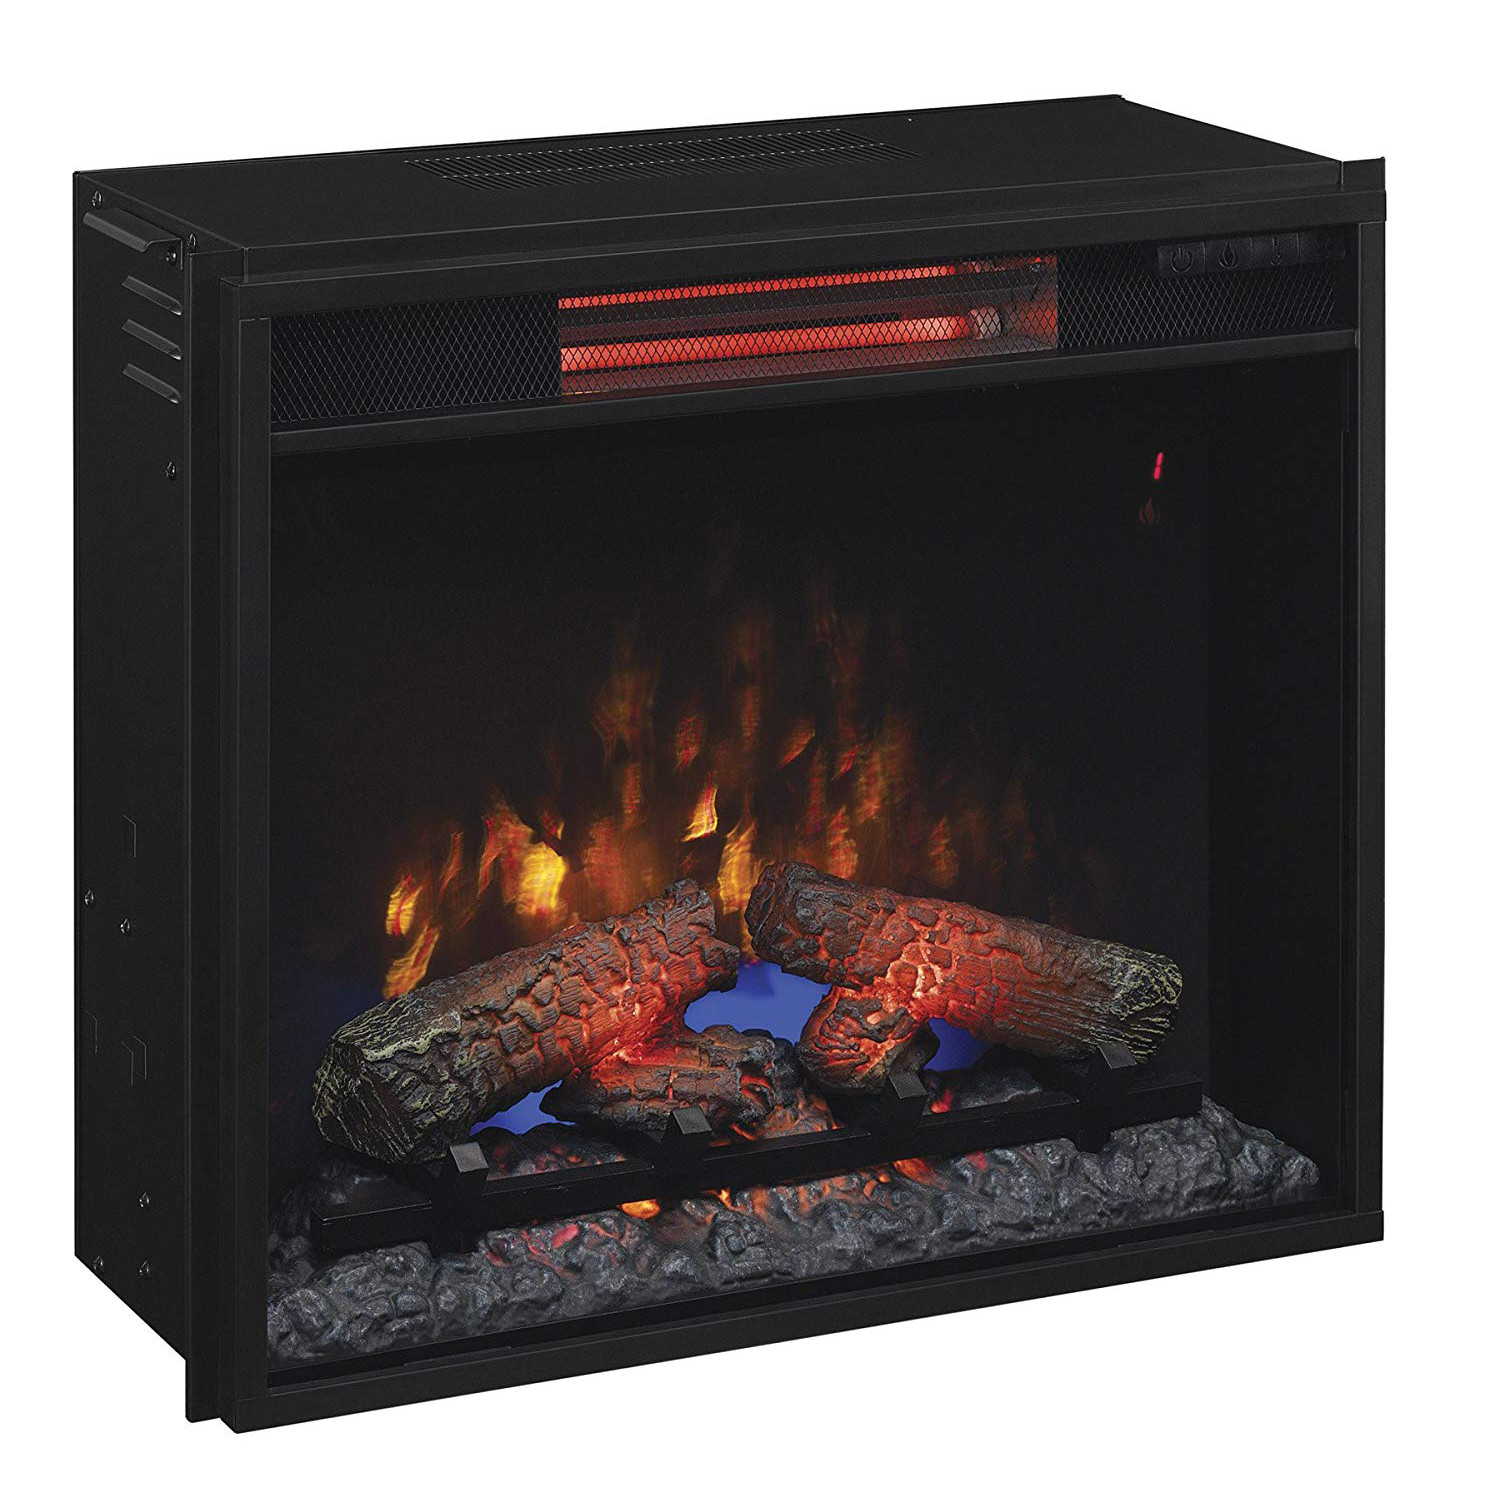 Duraflame Electric Fireplace Insert
 Duraflame 23 In Infrared Quartz Electric Fireplace Insert